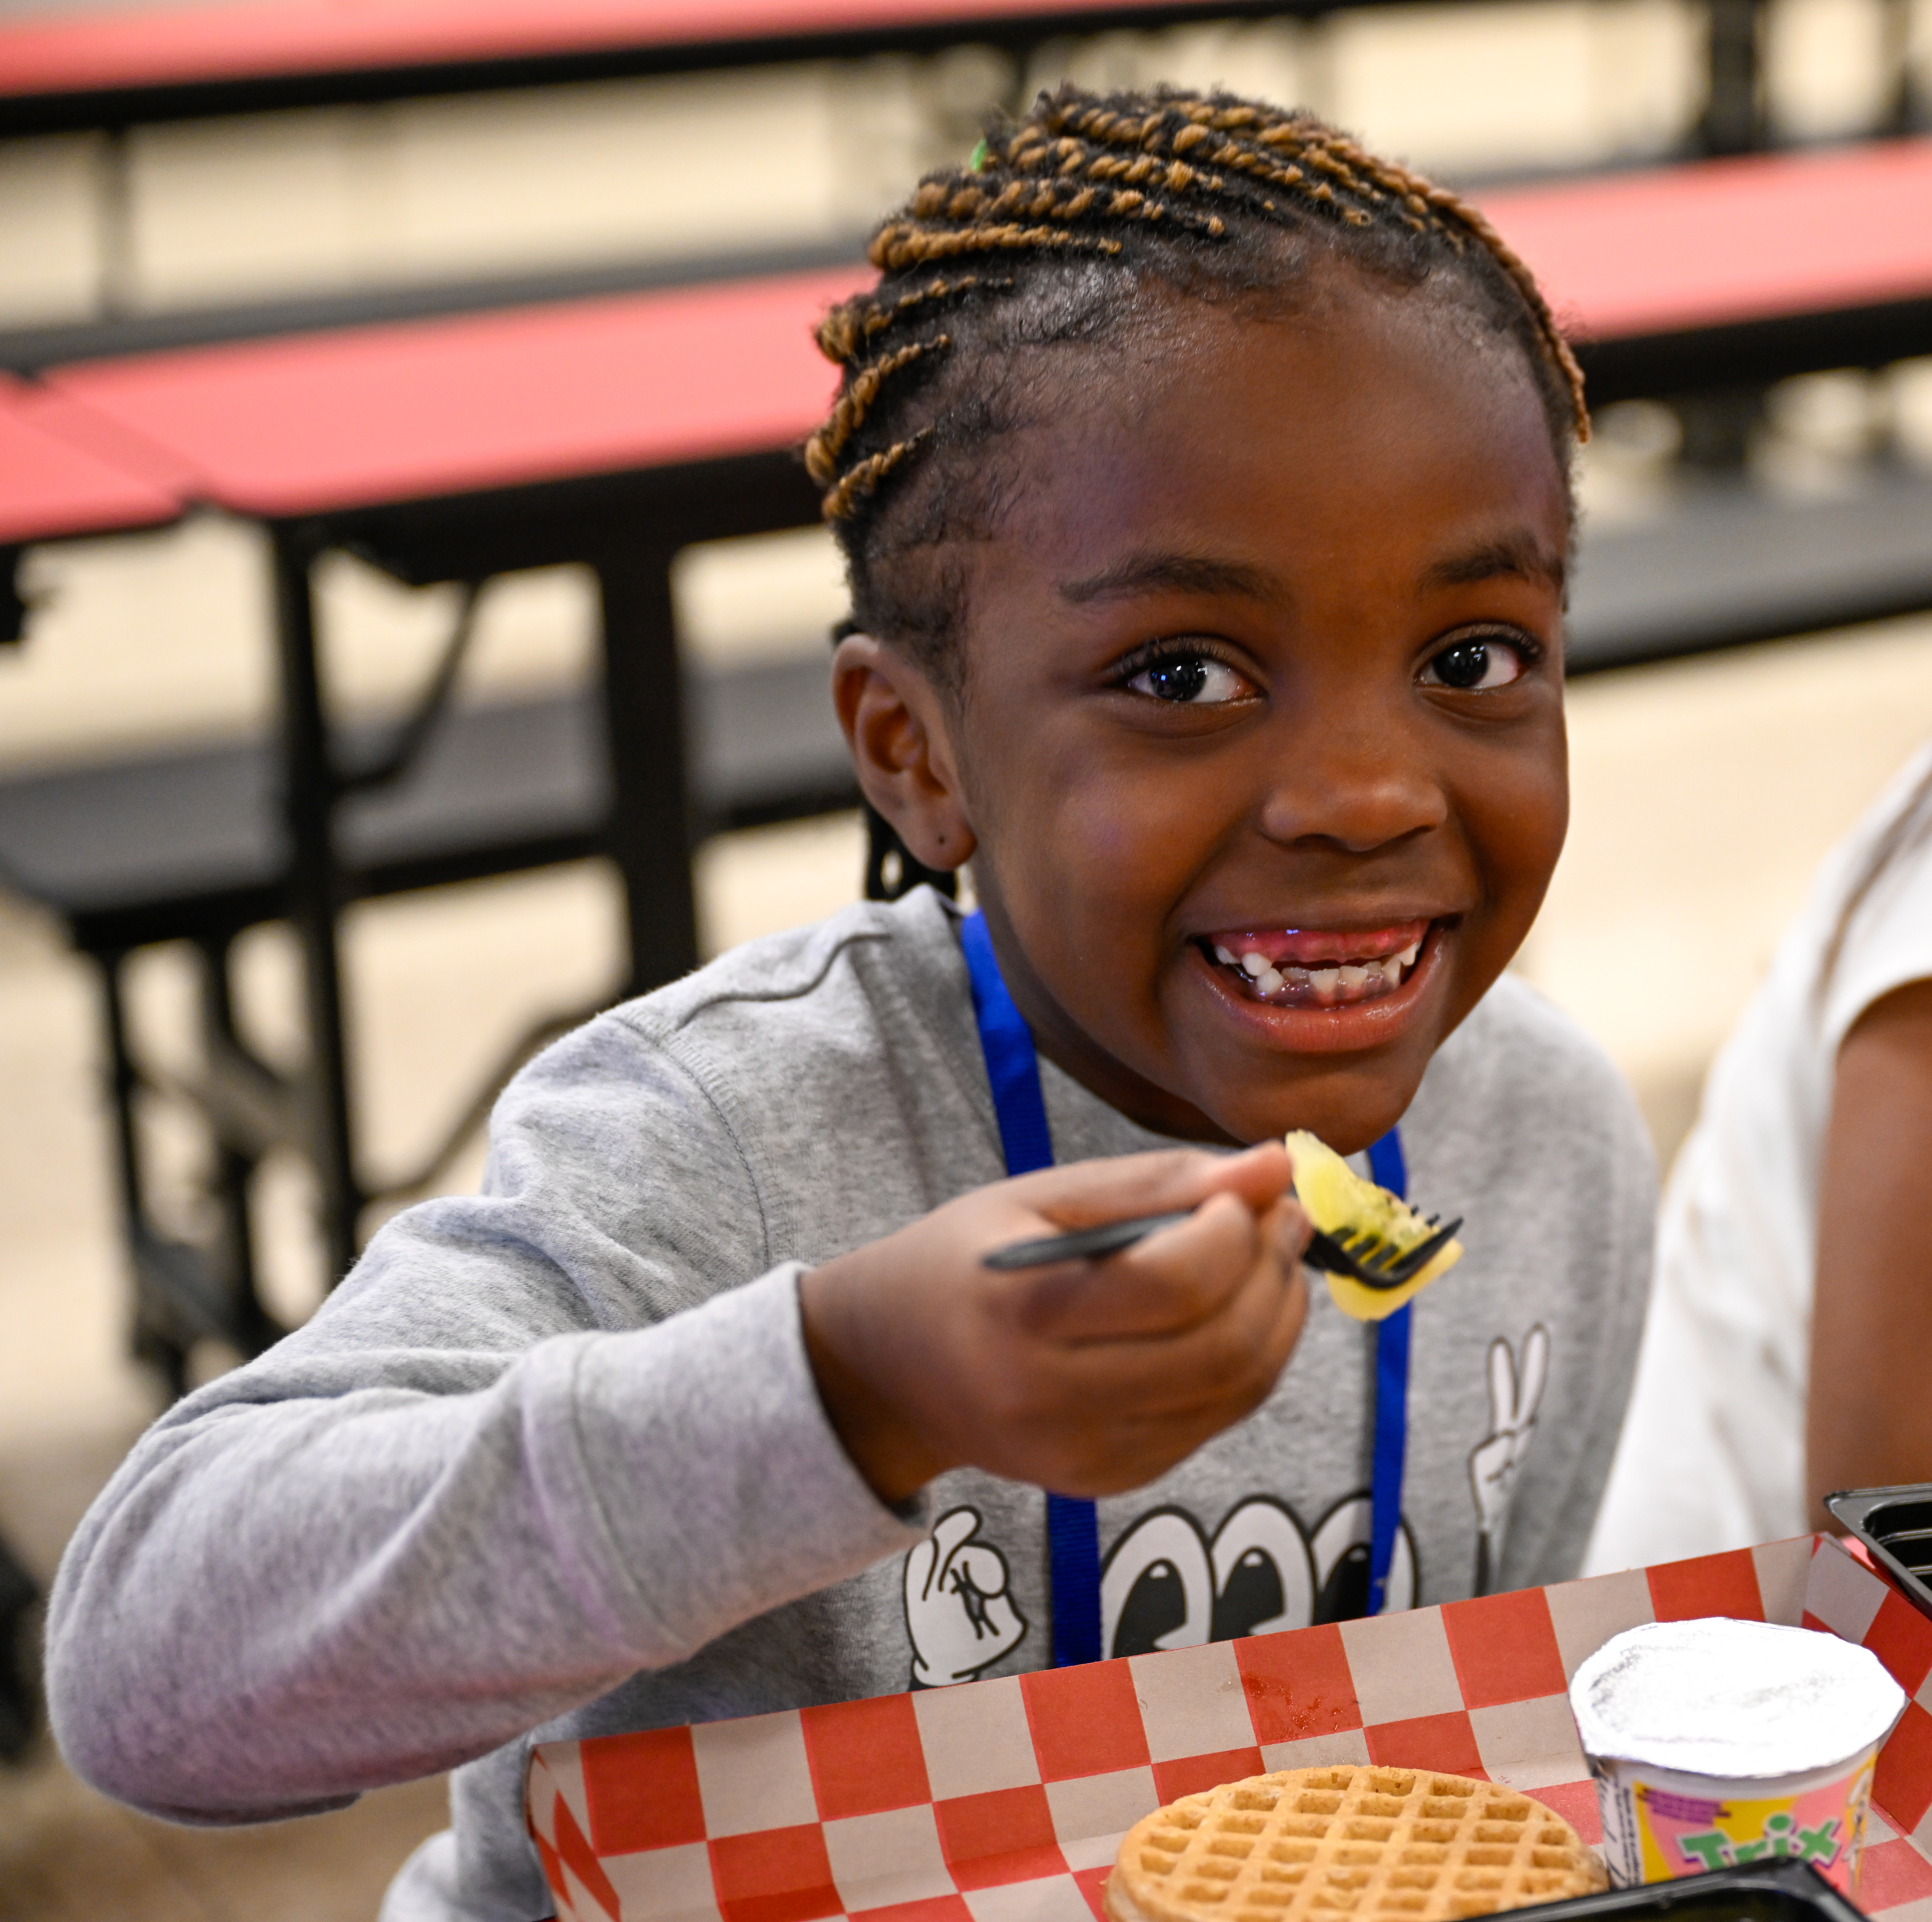 Student smiles while eating lunch in school cafeteria